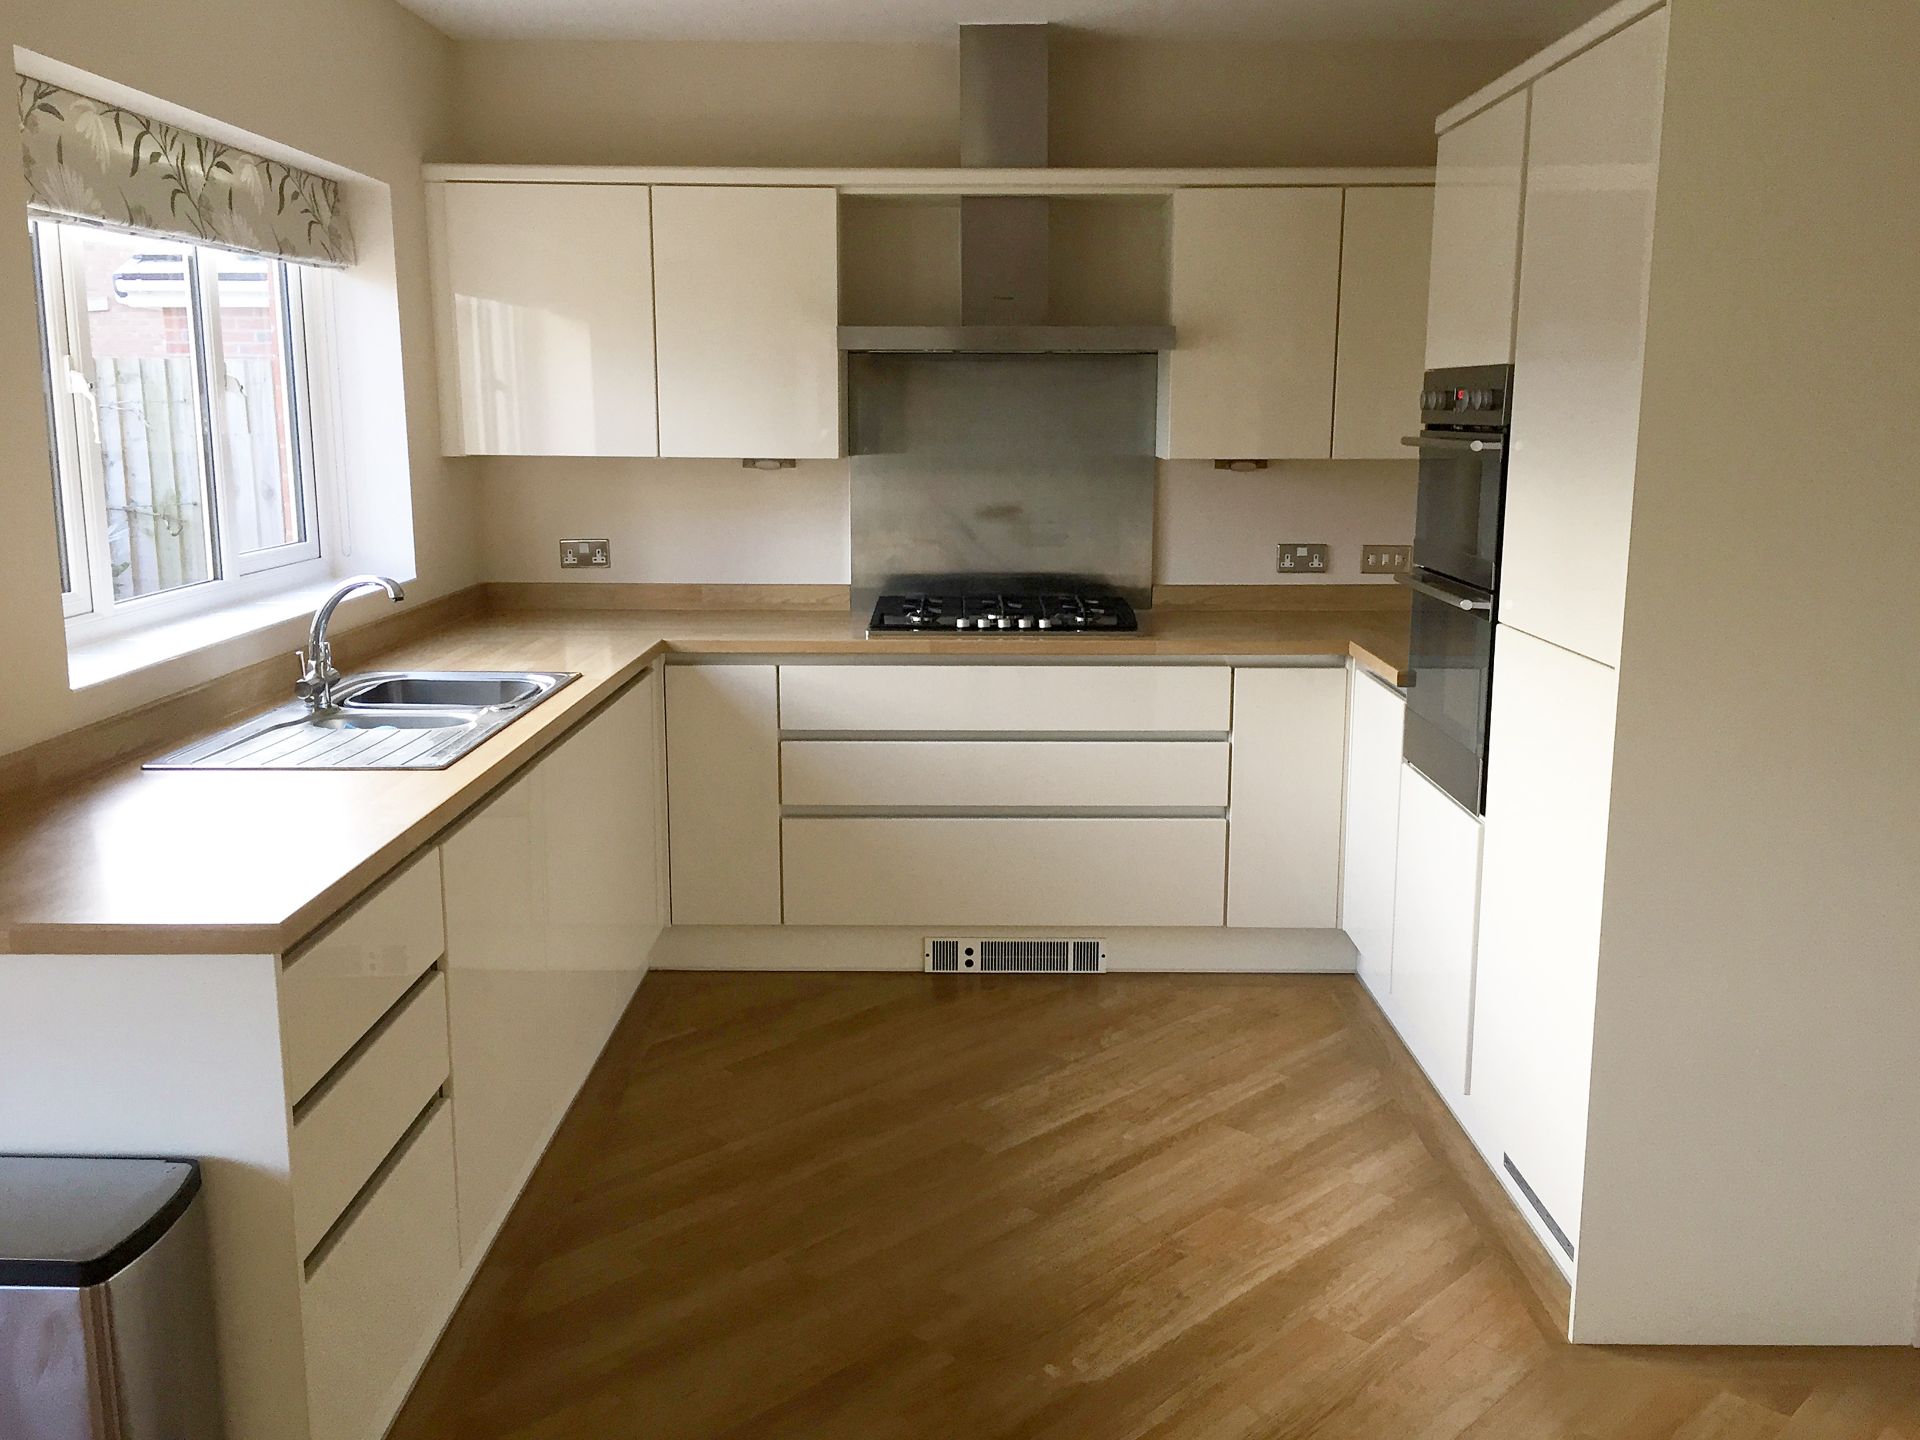 1 x Panorama Modern White Gloss Handless Kitchen With Timber Worktop And Appliances – Approx 2 years - Image 7 of 40